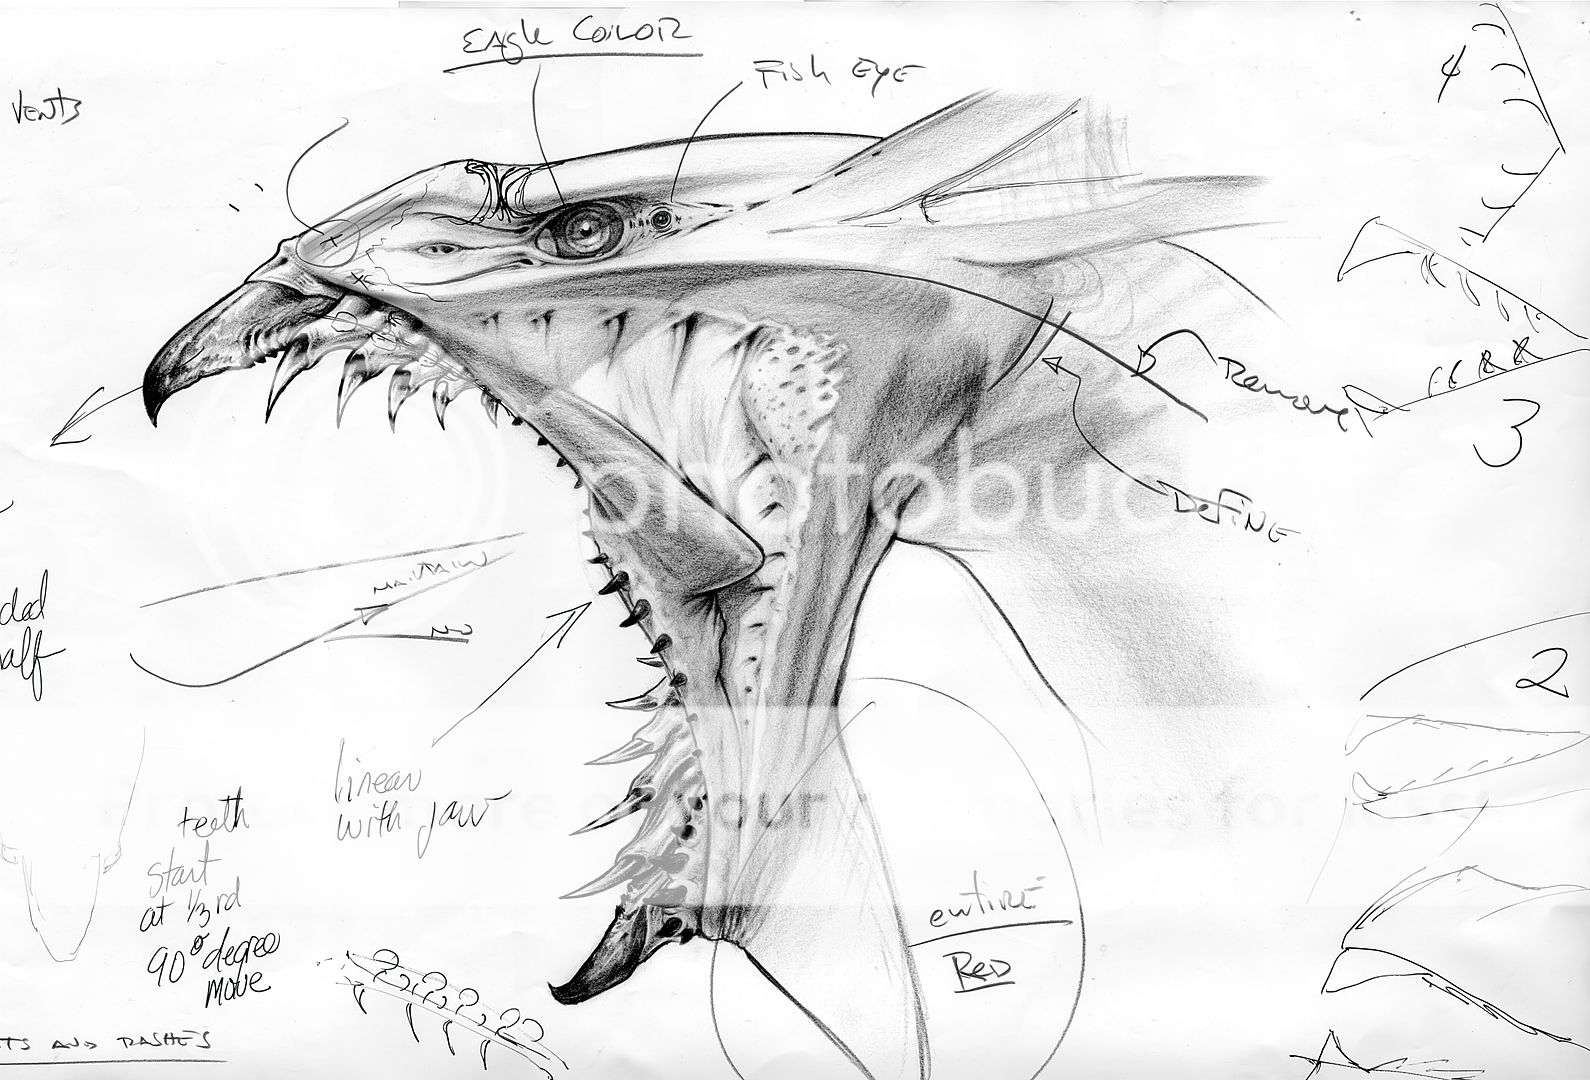 Early concept drawing of the Banshee bird, meant to employ biomechanical form and function.